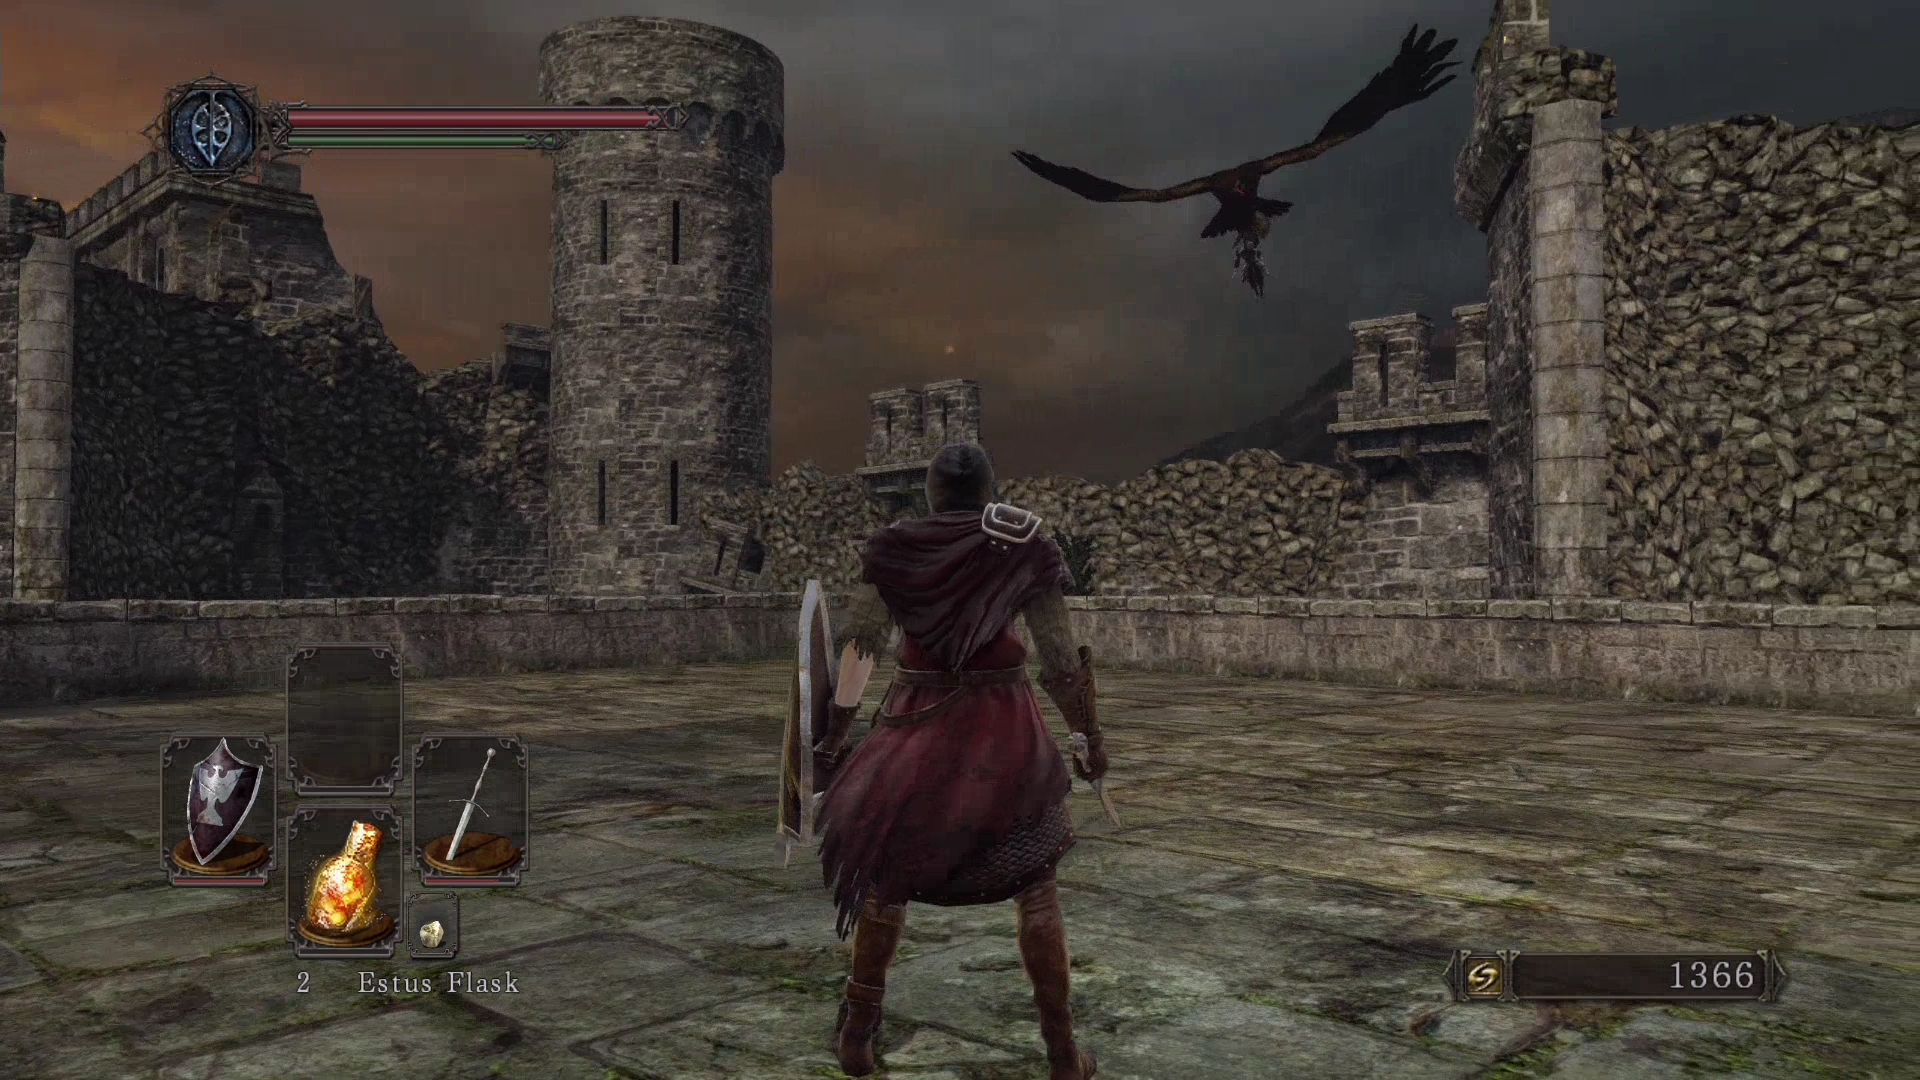 Dark Souls 2 on the PC: Has From Software Learned its Lessons? - GameSpot